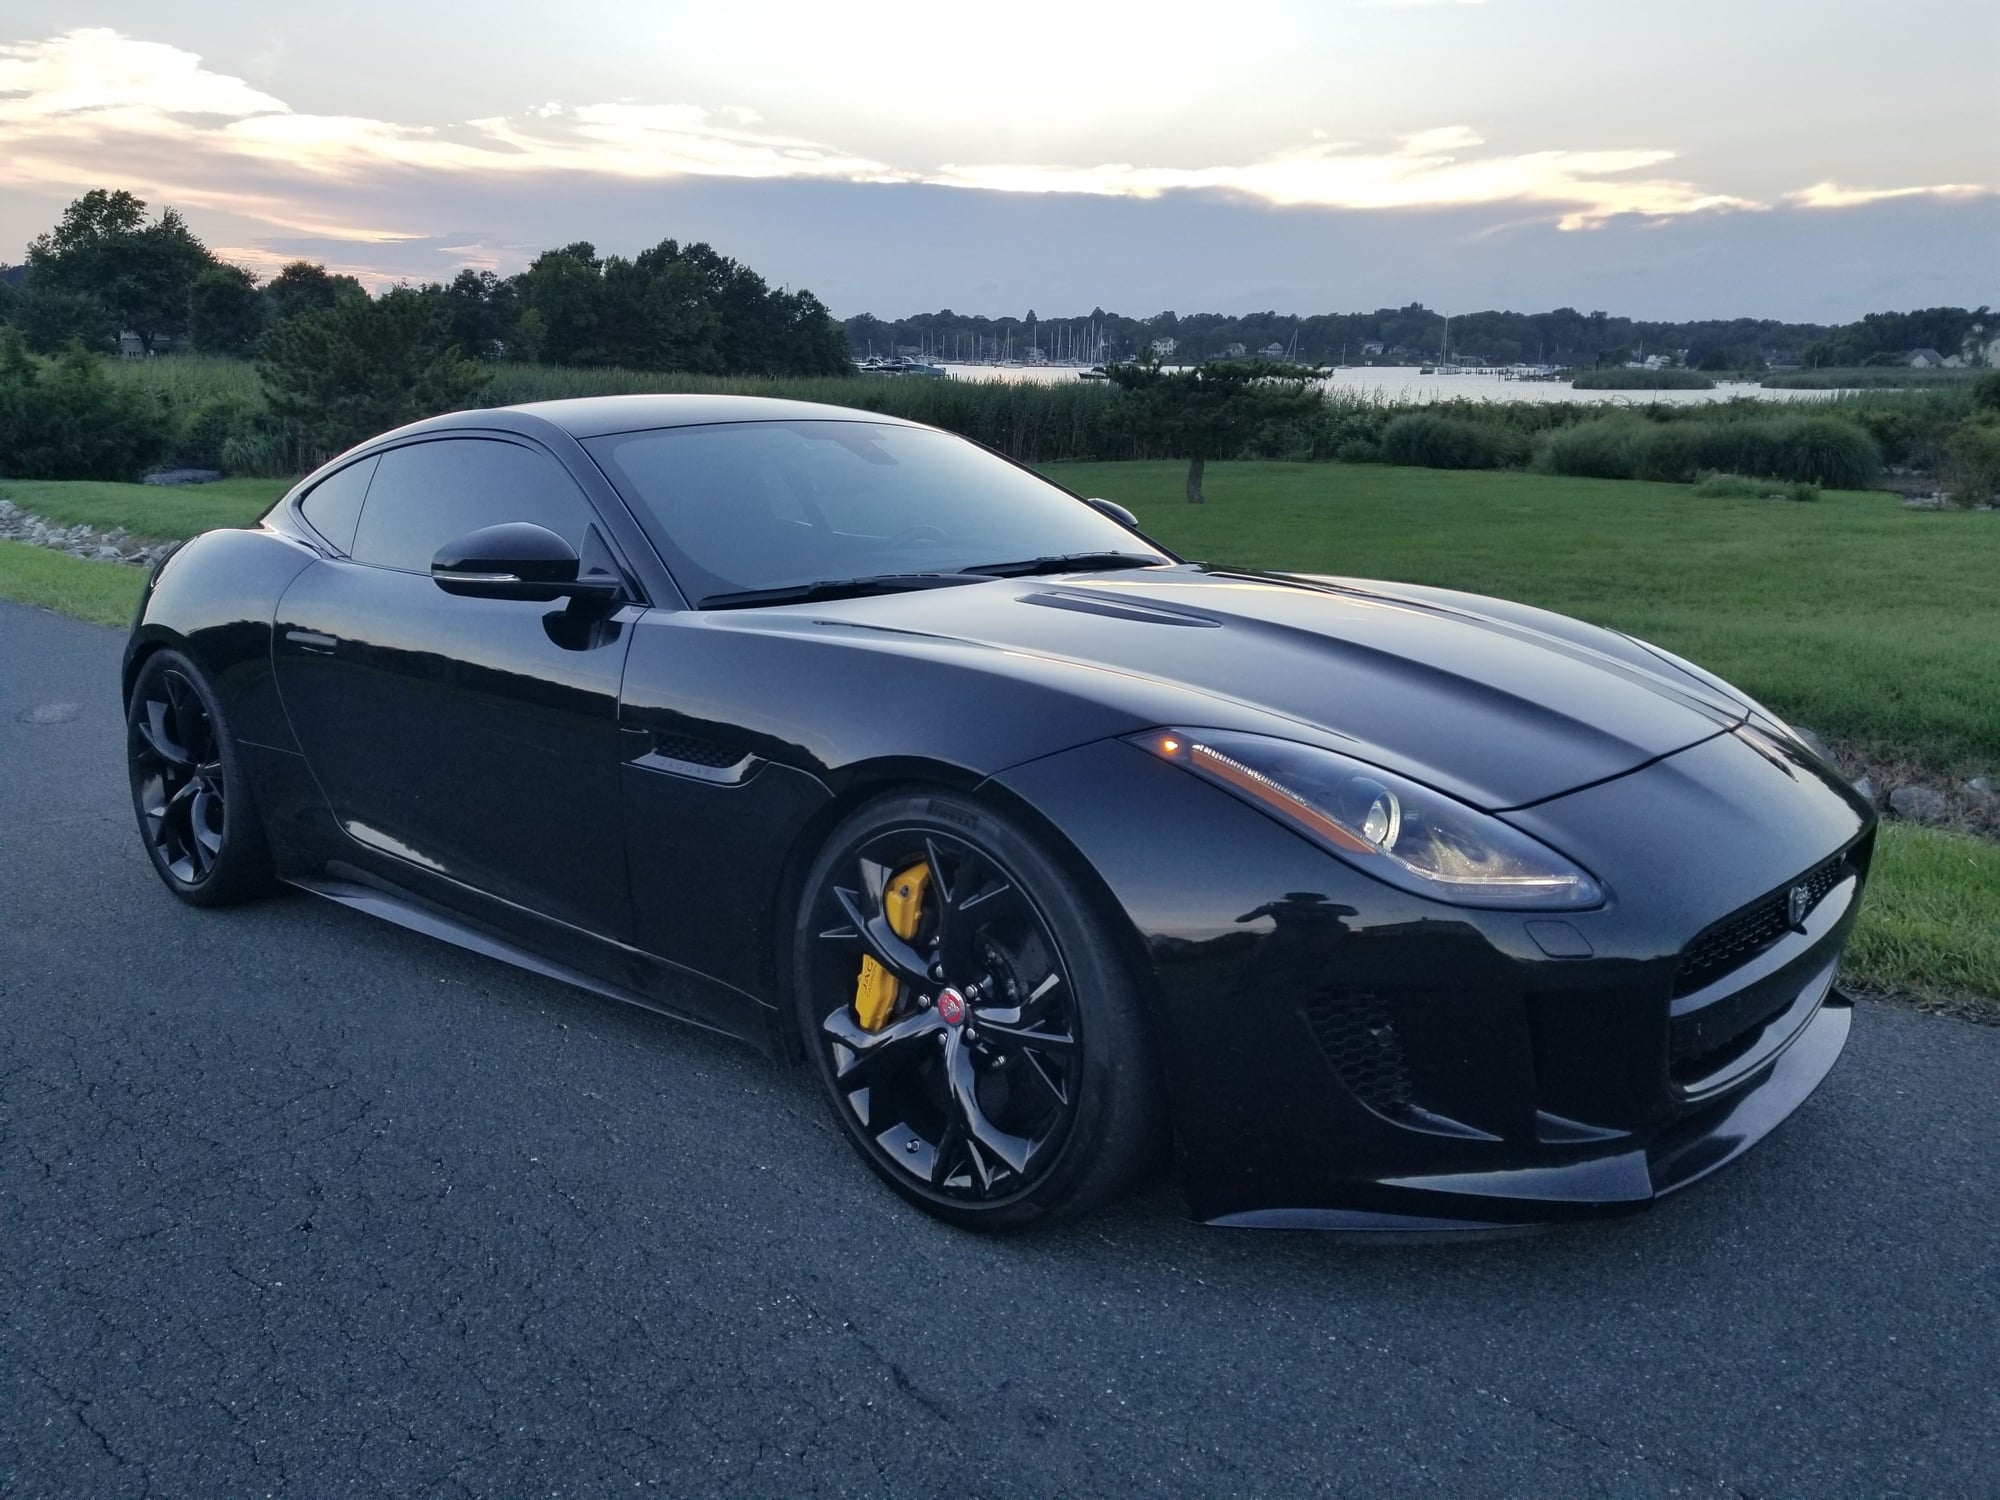 2015 Jaguar F-Type - 2015 Jaguar F-Type R V8 Coupe. w/ Ceramic Brakes and Project 7 Wheels - Used - VIN SAJWA6DA4FMK10634 - 22,000 Miles - 8 cyl - 2WD - Automatic - Coupe - Black - Annapolis, MD 21403, United States